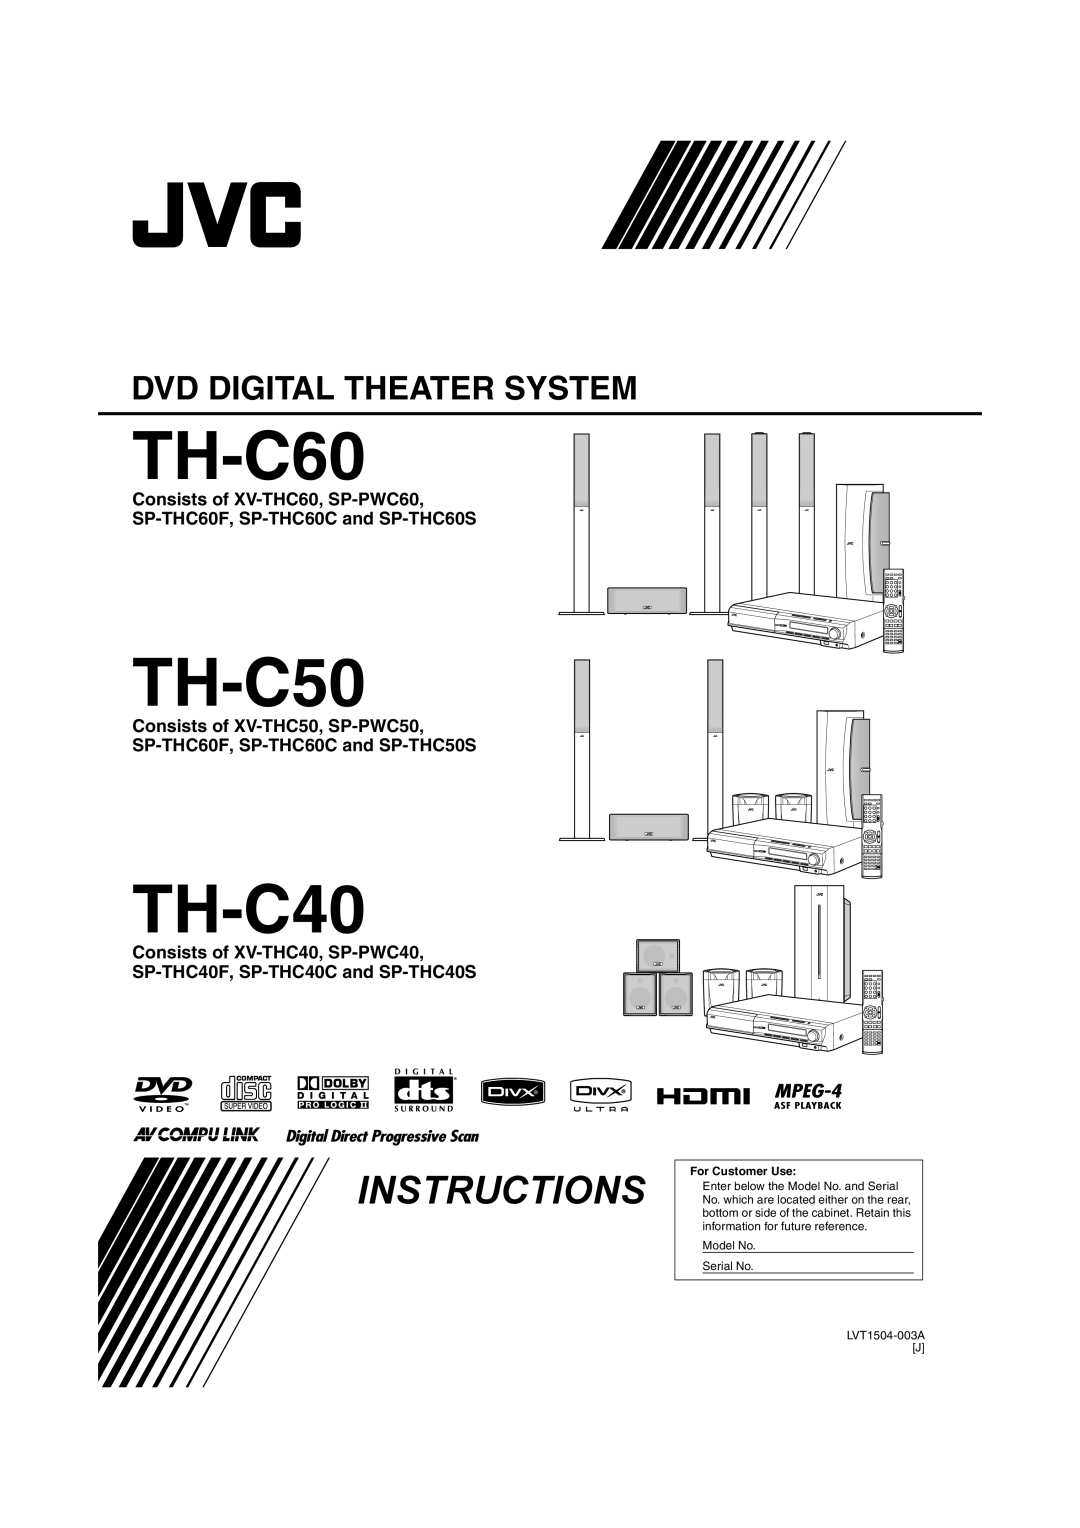 JVC TH-C50 manual TH-C60, TH-C40, Instructions, Dvd Digital Theater System, For Customer Use, Model No, Serial No 